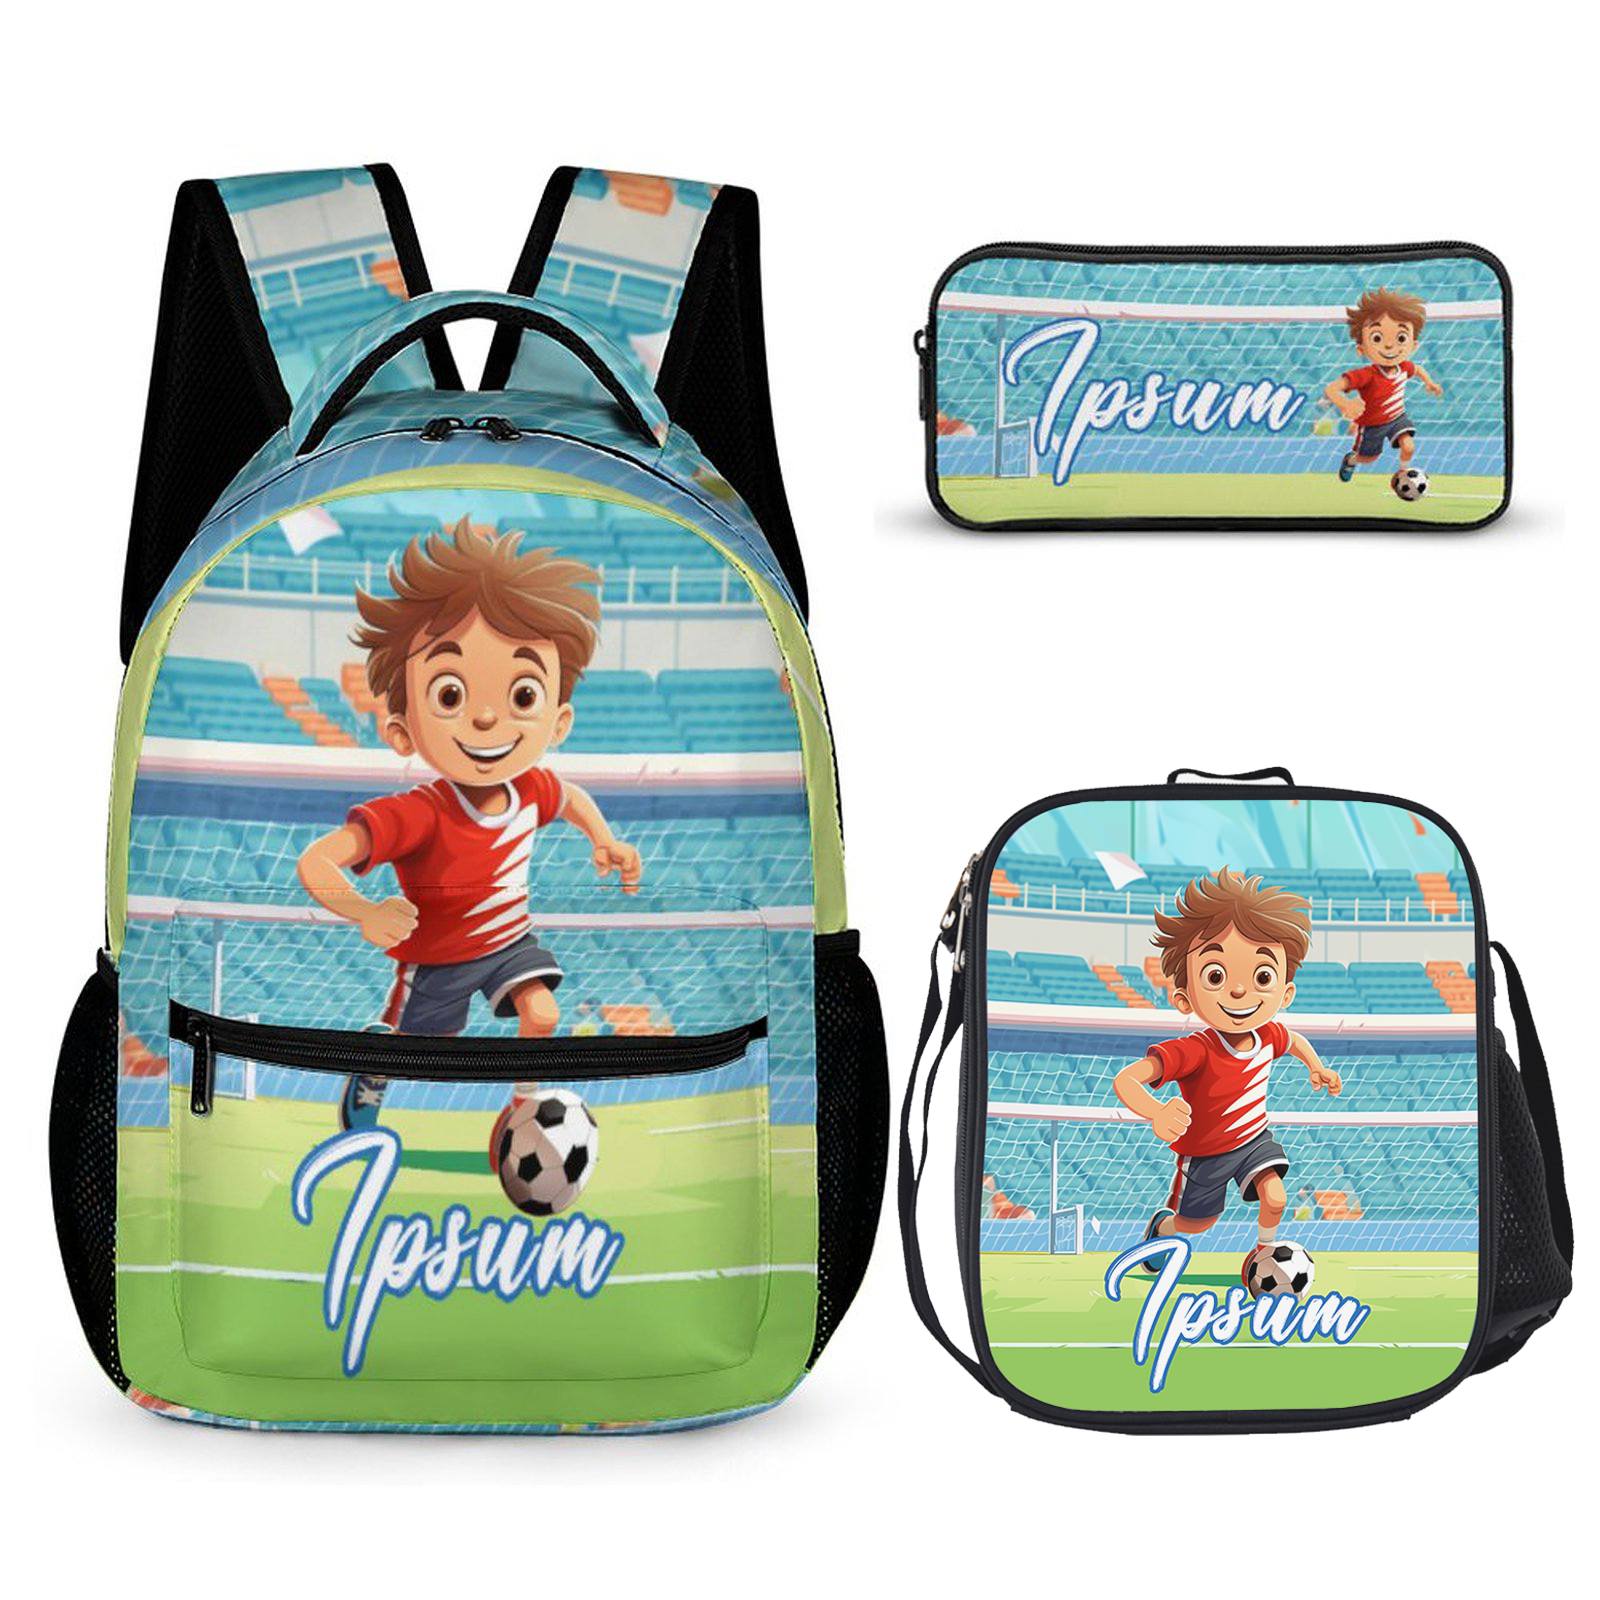 Customized Backpack 3-Piece Set